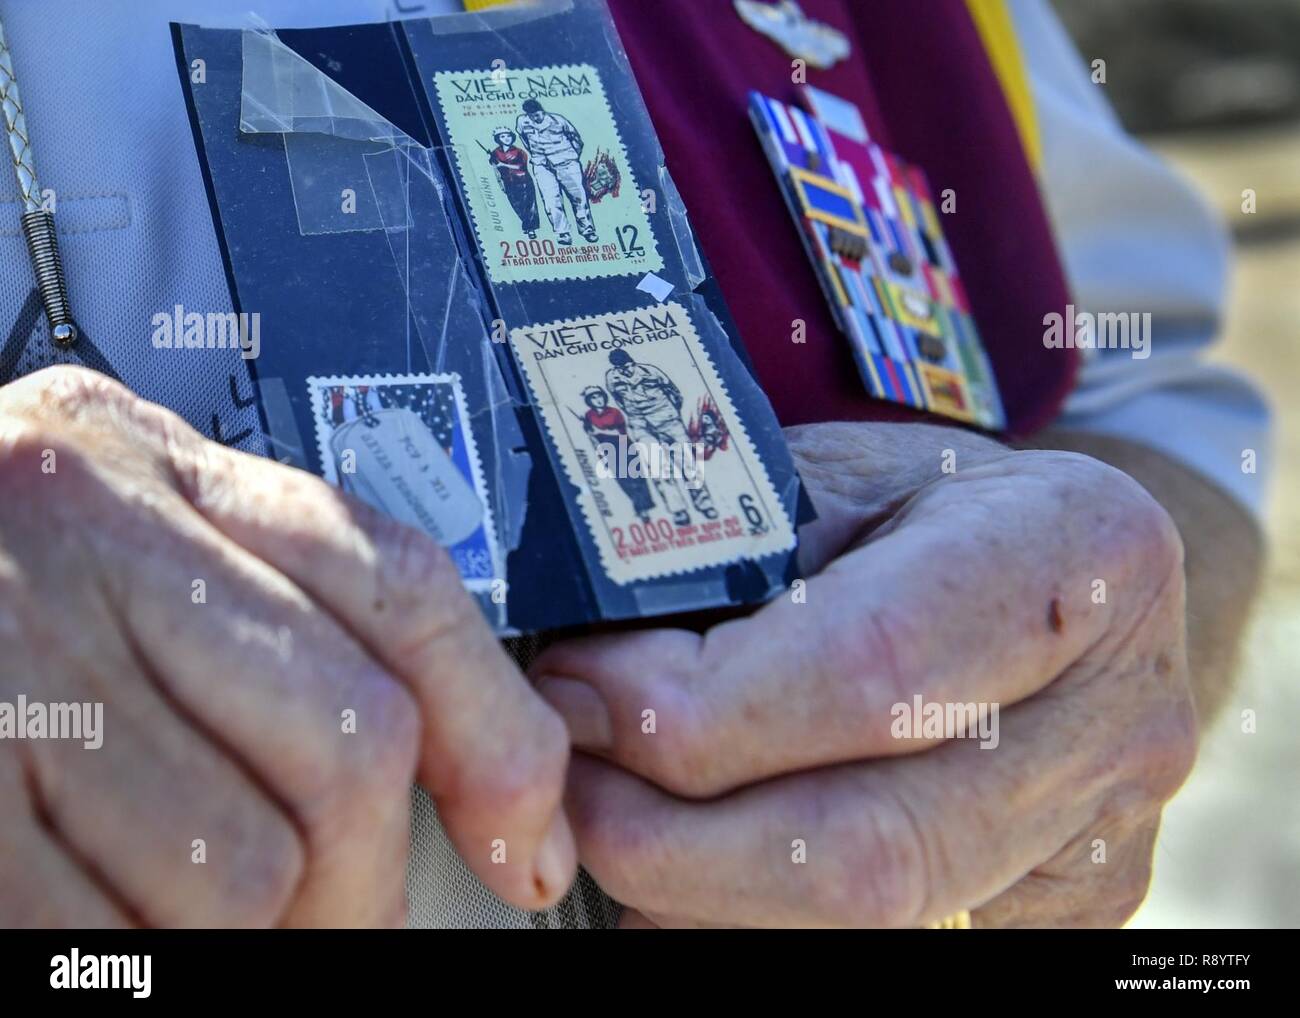 Retired U.S. Air Force Capt. William Robinson, longest surviving enlisted prisoner of war, holds a stamp, depicting him and a Vietnamese woman, used for propaganda after an award ceremony here, March 17, 2017. Robinson was a POW for nearly eight years before being released. Now, Robinson speaks about his experience with community and military members across the country. Stock Photo